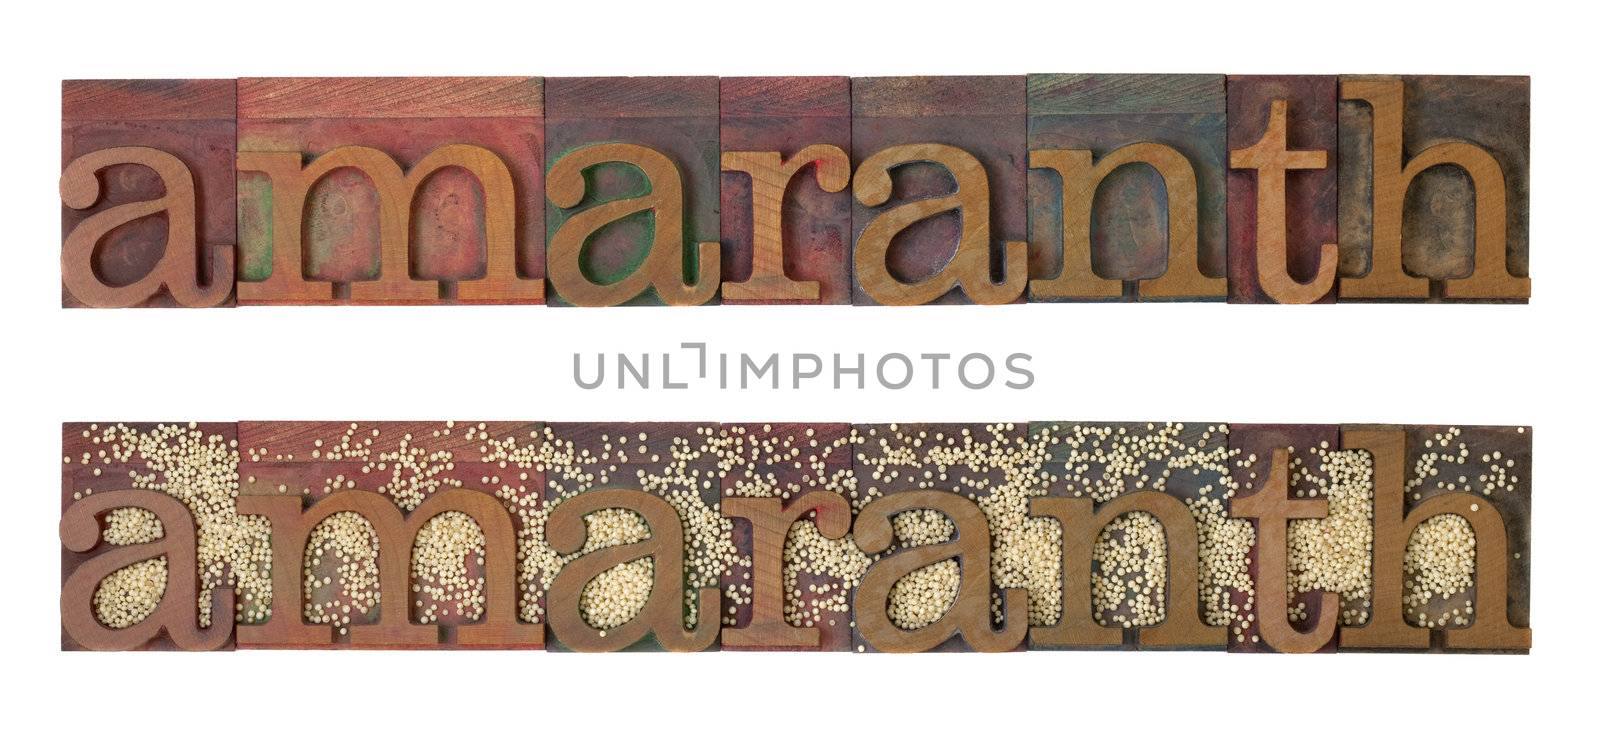 amaranth word combined with grain, two layouts in vintage wooden letterpress type blocks, stained by color ink, isolated on white